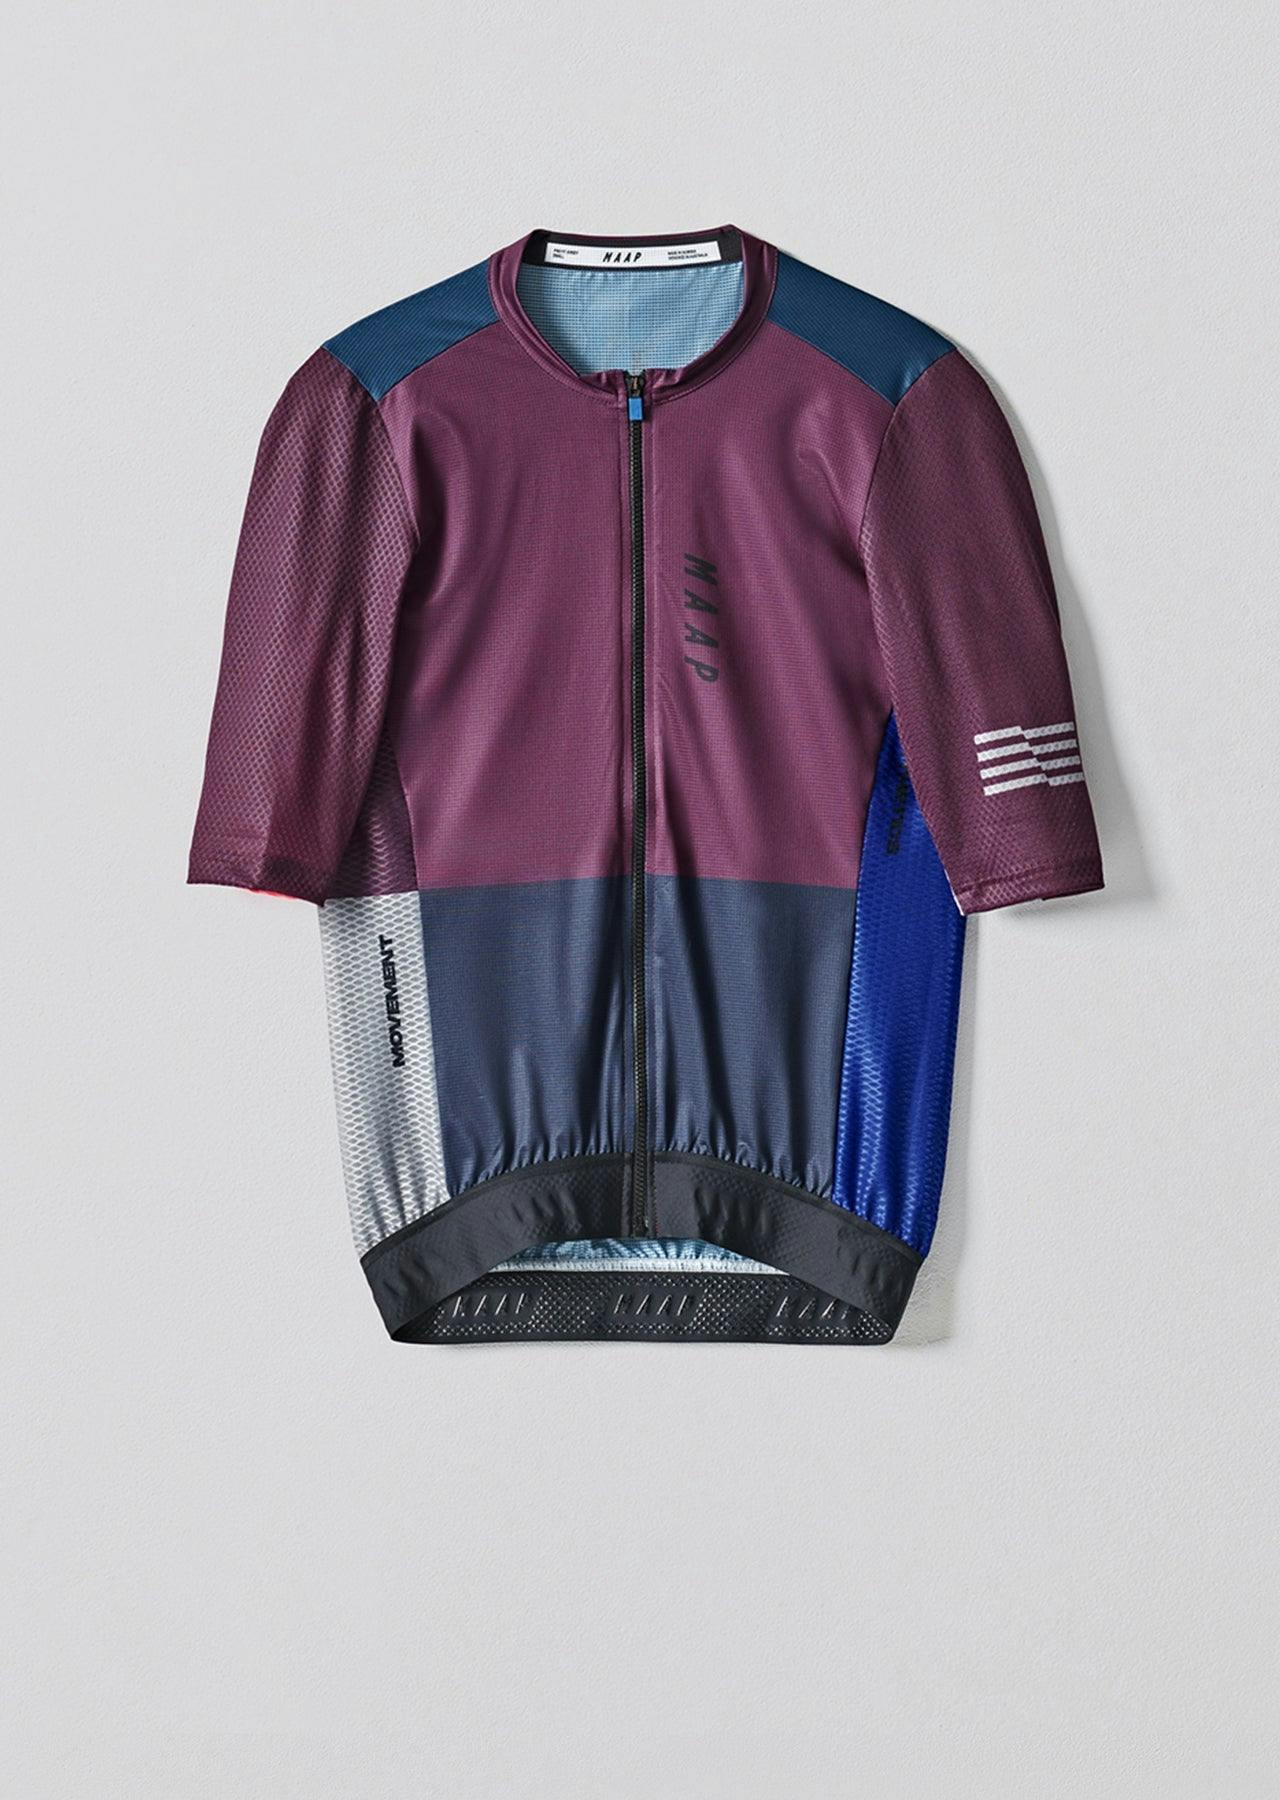 Voyage Pro Air Jersey